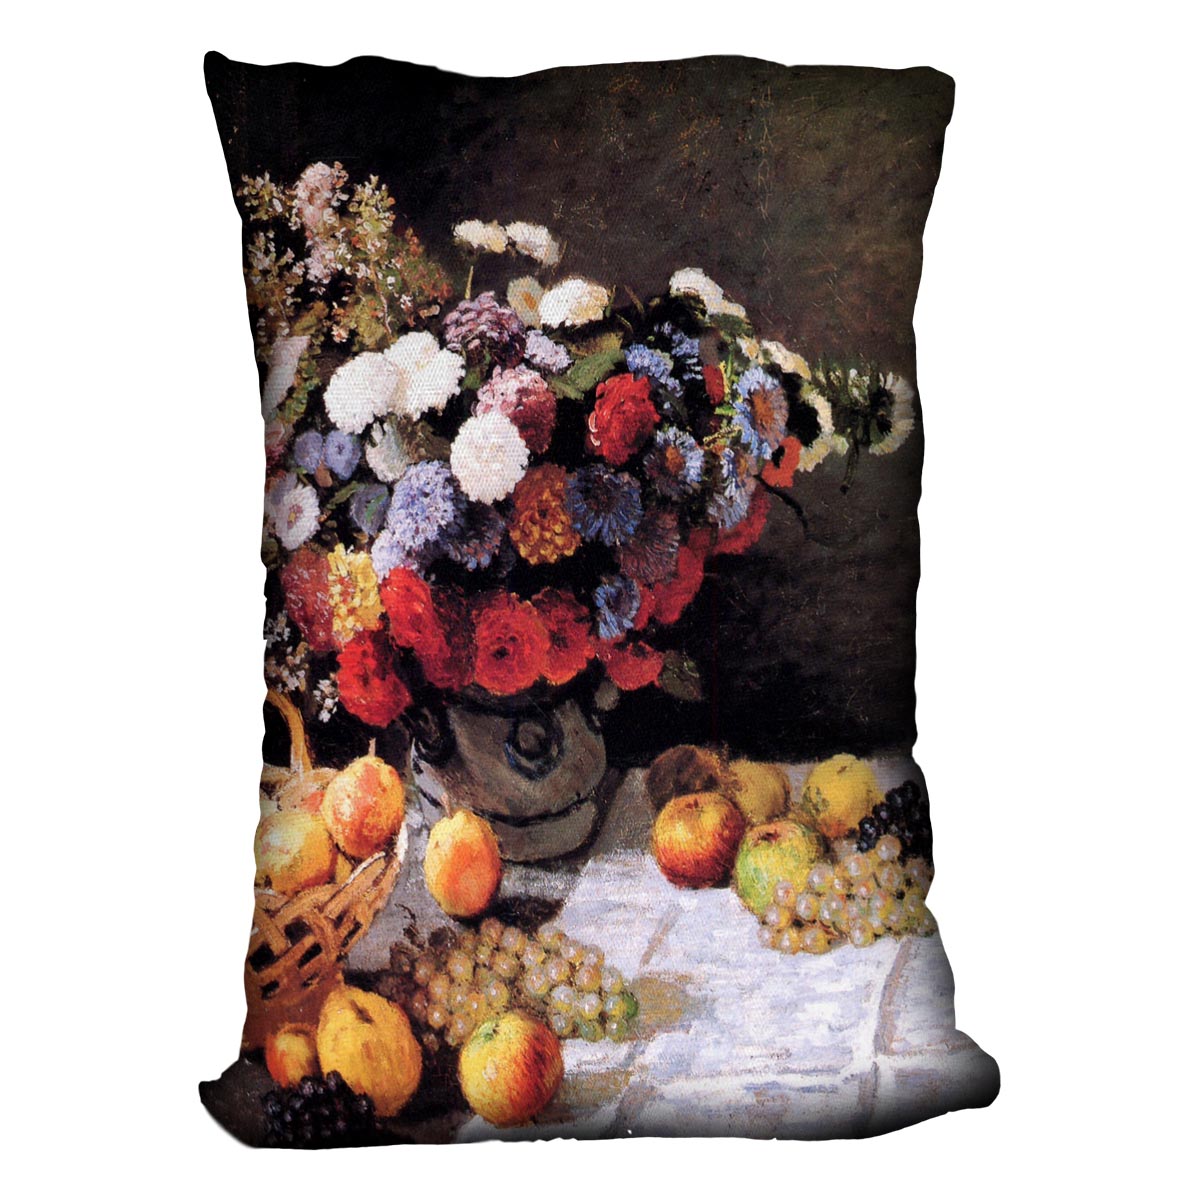 Flowers and Fruits by Monet Cushion